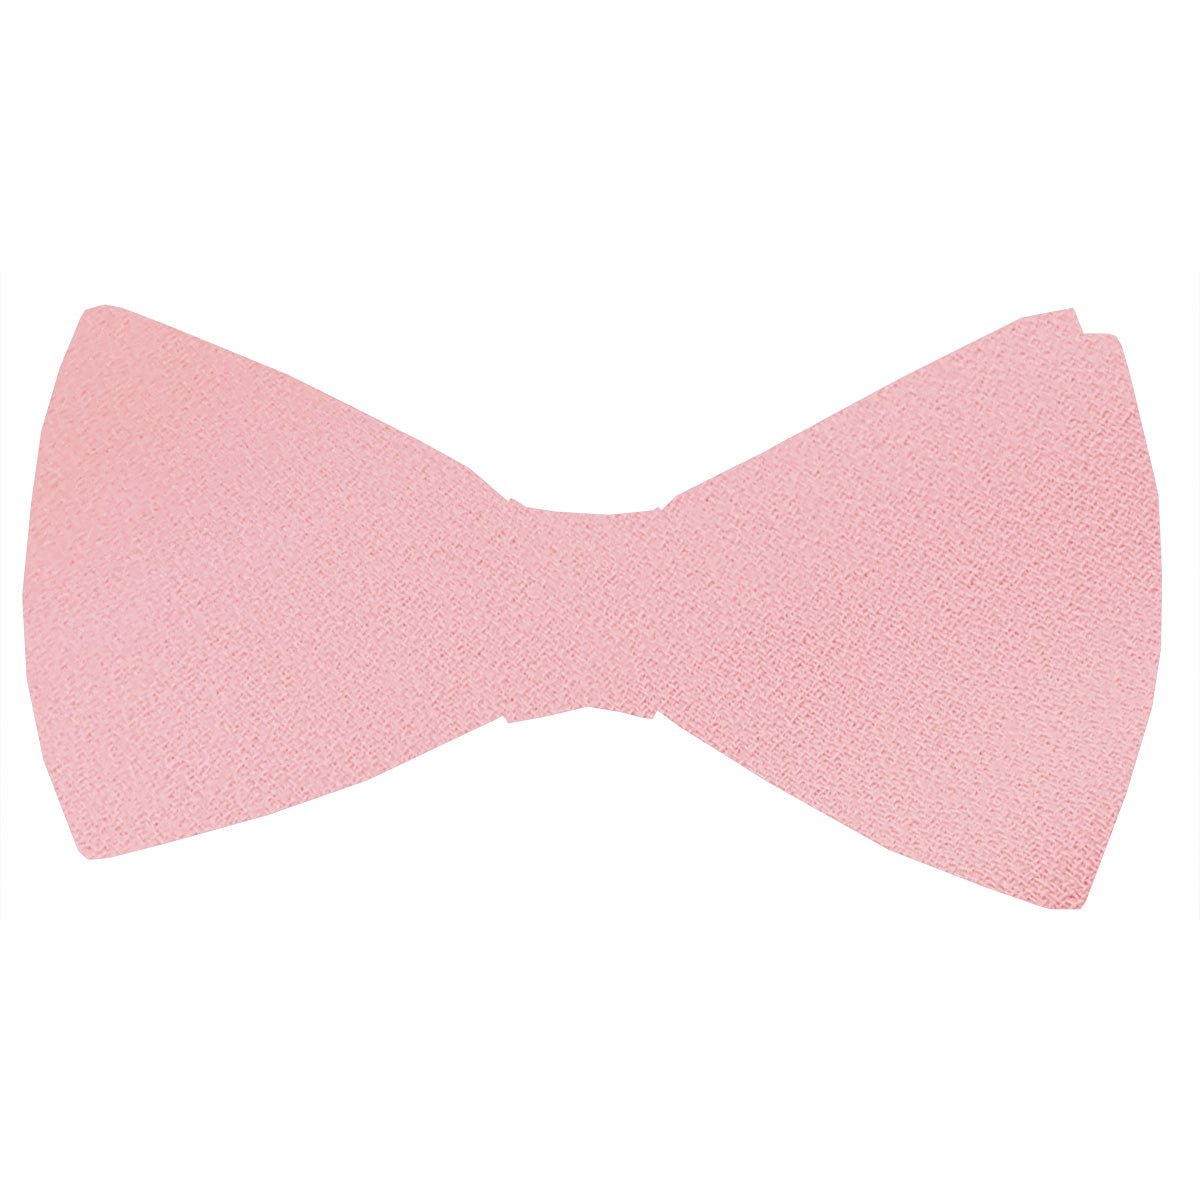 Apricot Bow Ties